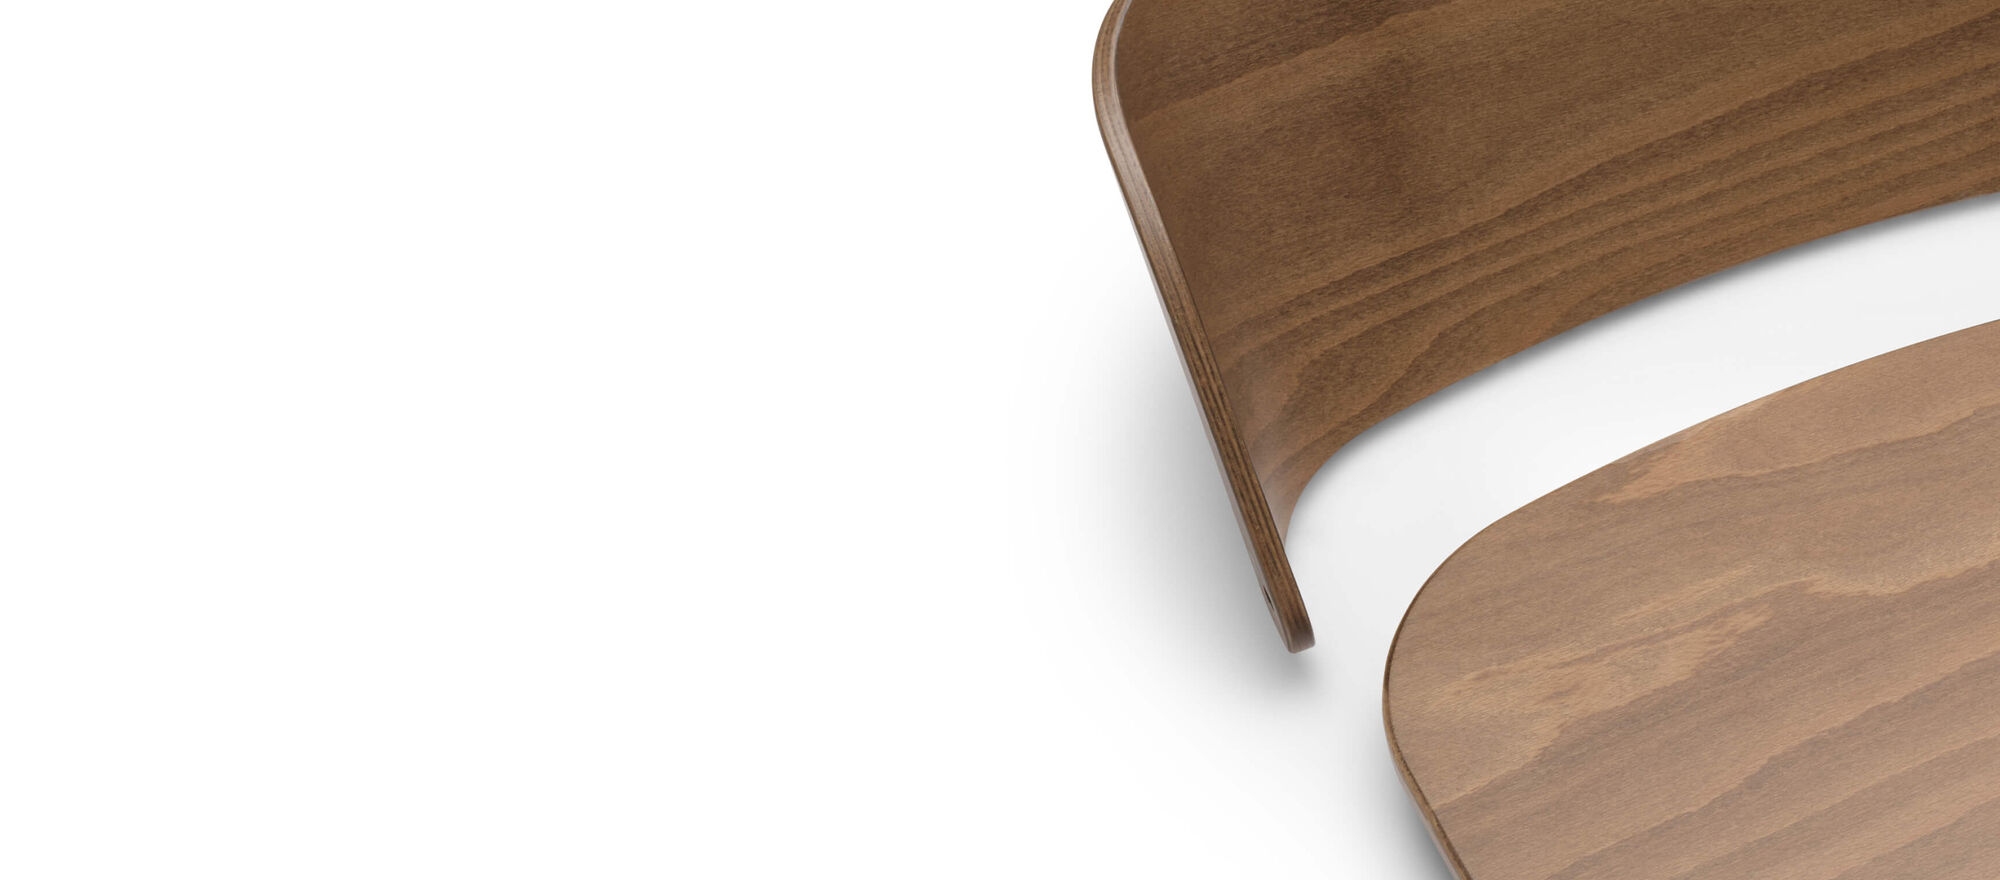 A detached backrest and seat of the Bugaboo Giraffe chair, made of natural wood with a polished, high-quality finish.